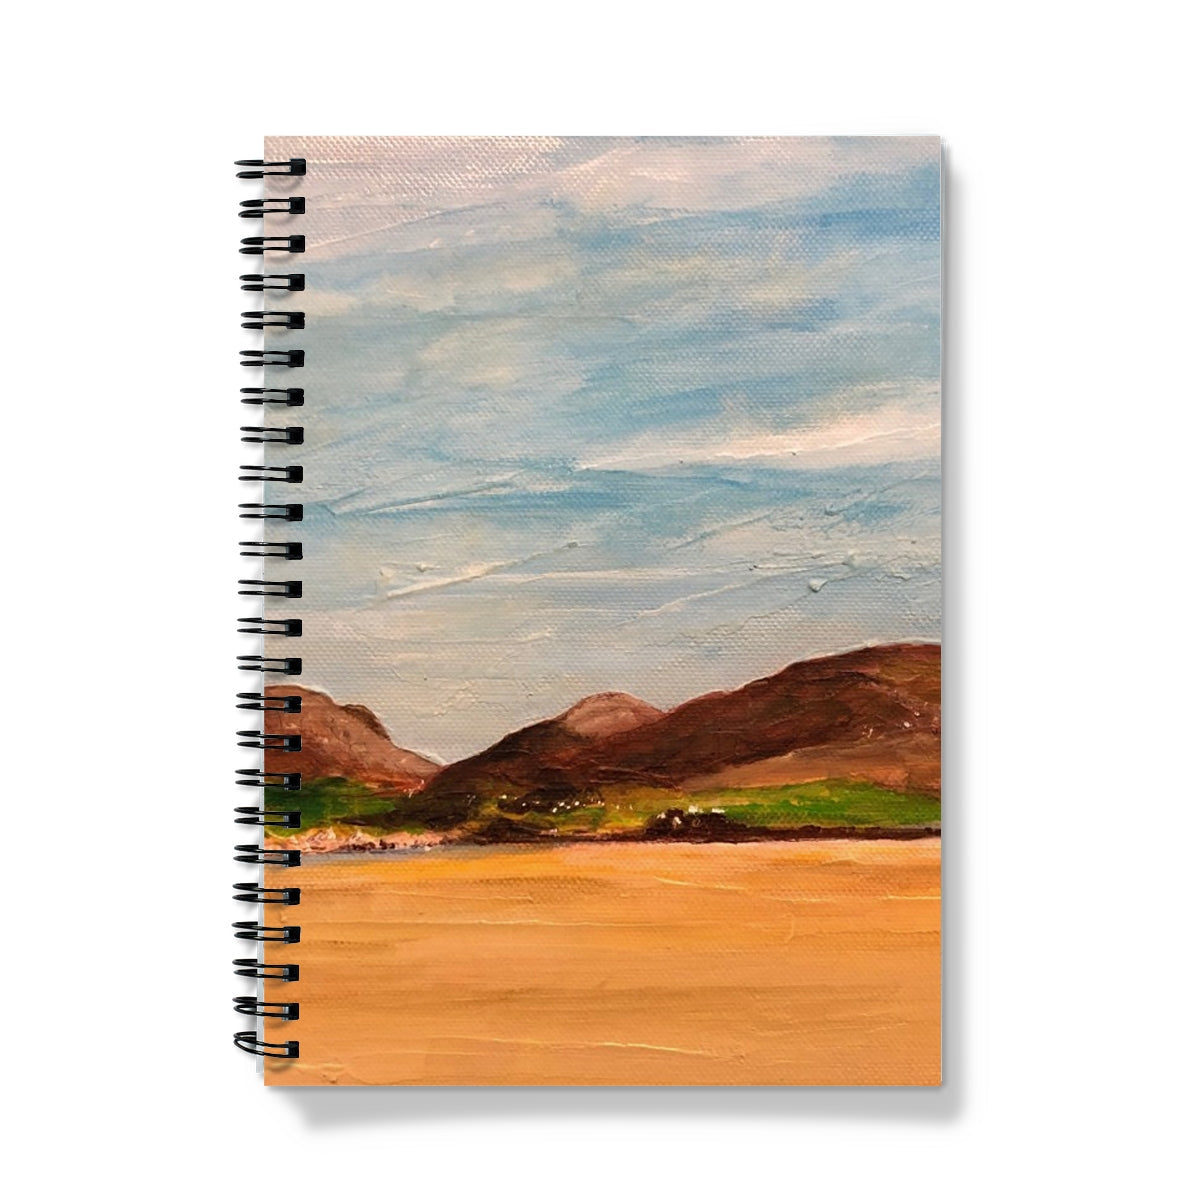 Uig Sands Lewis Art Gifts Notebook-Journals & Notebooks-Hebridean Islands Art Gallery-A5-Lined-Paintings, Prints, Homeware, Art Gifts From Scotland By Scottish Artist Kevin Hunter